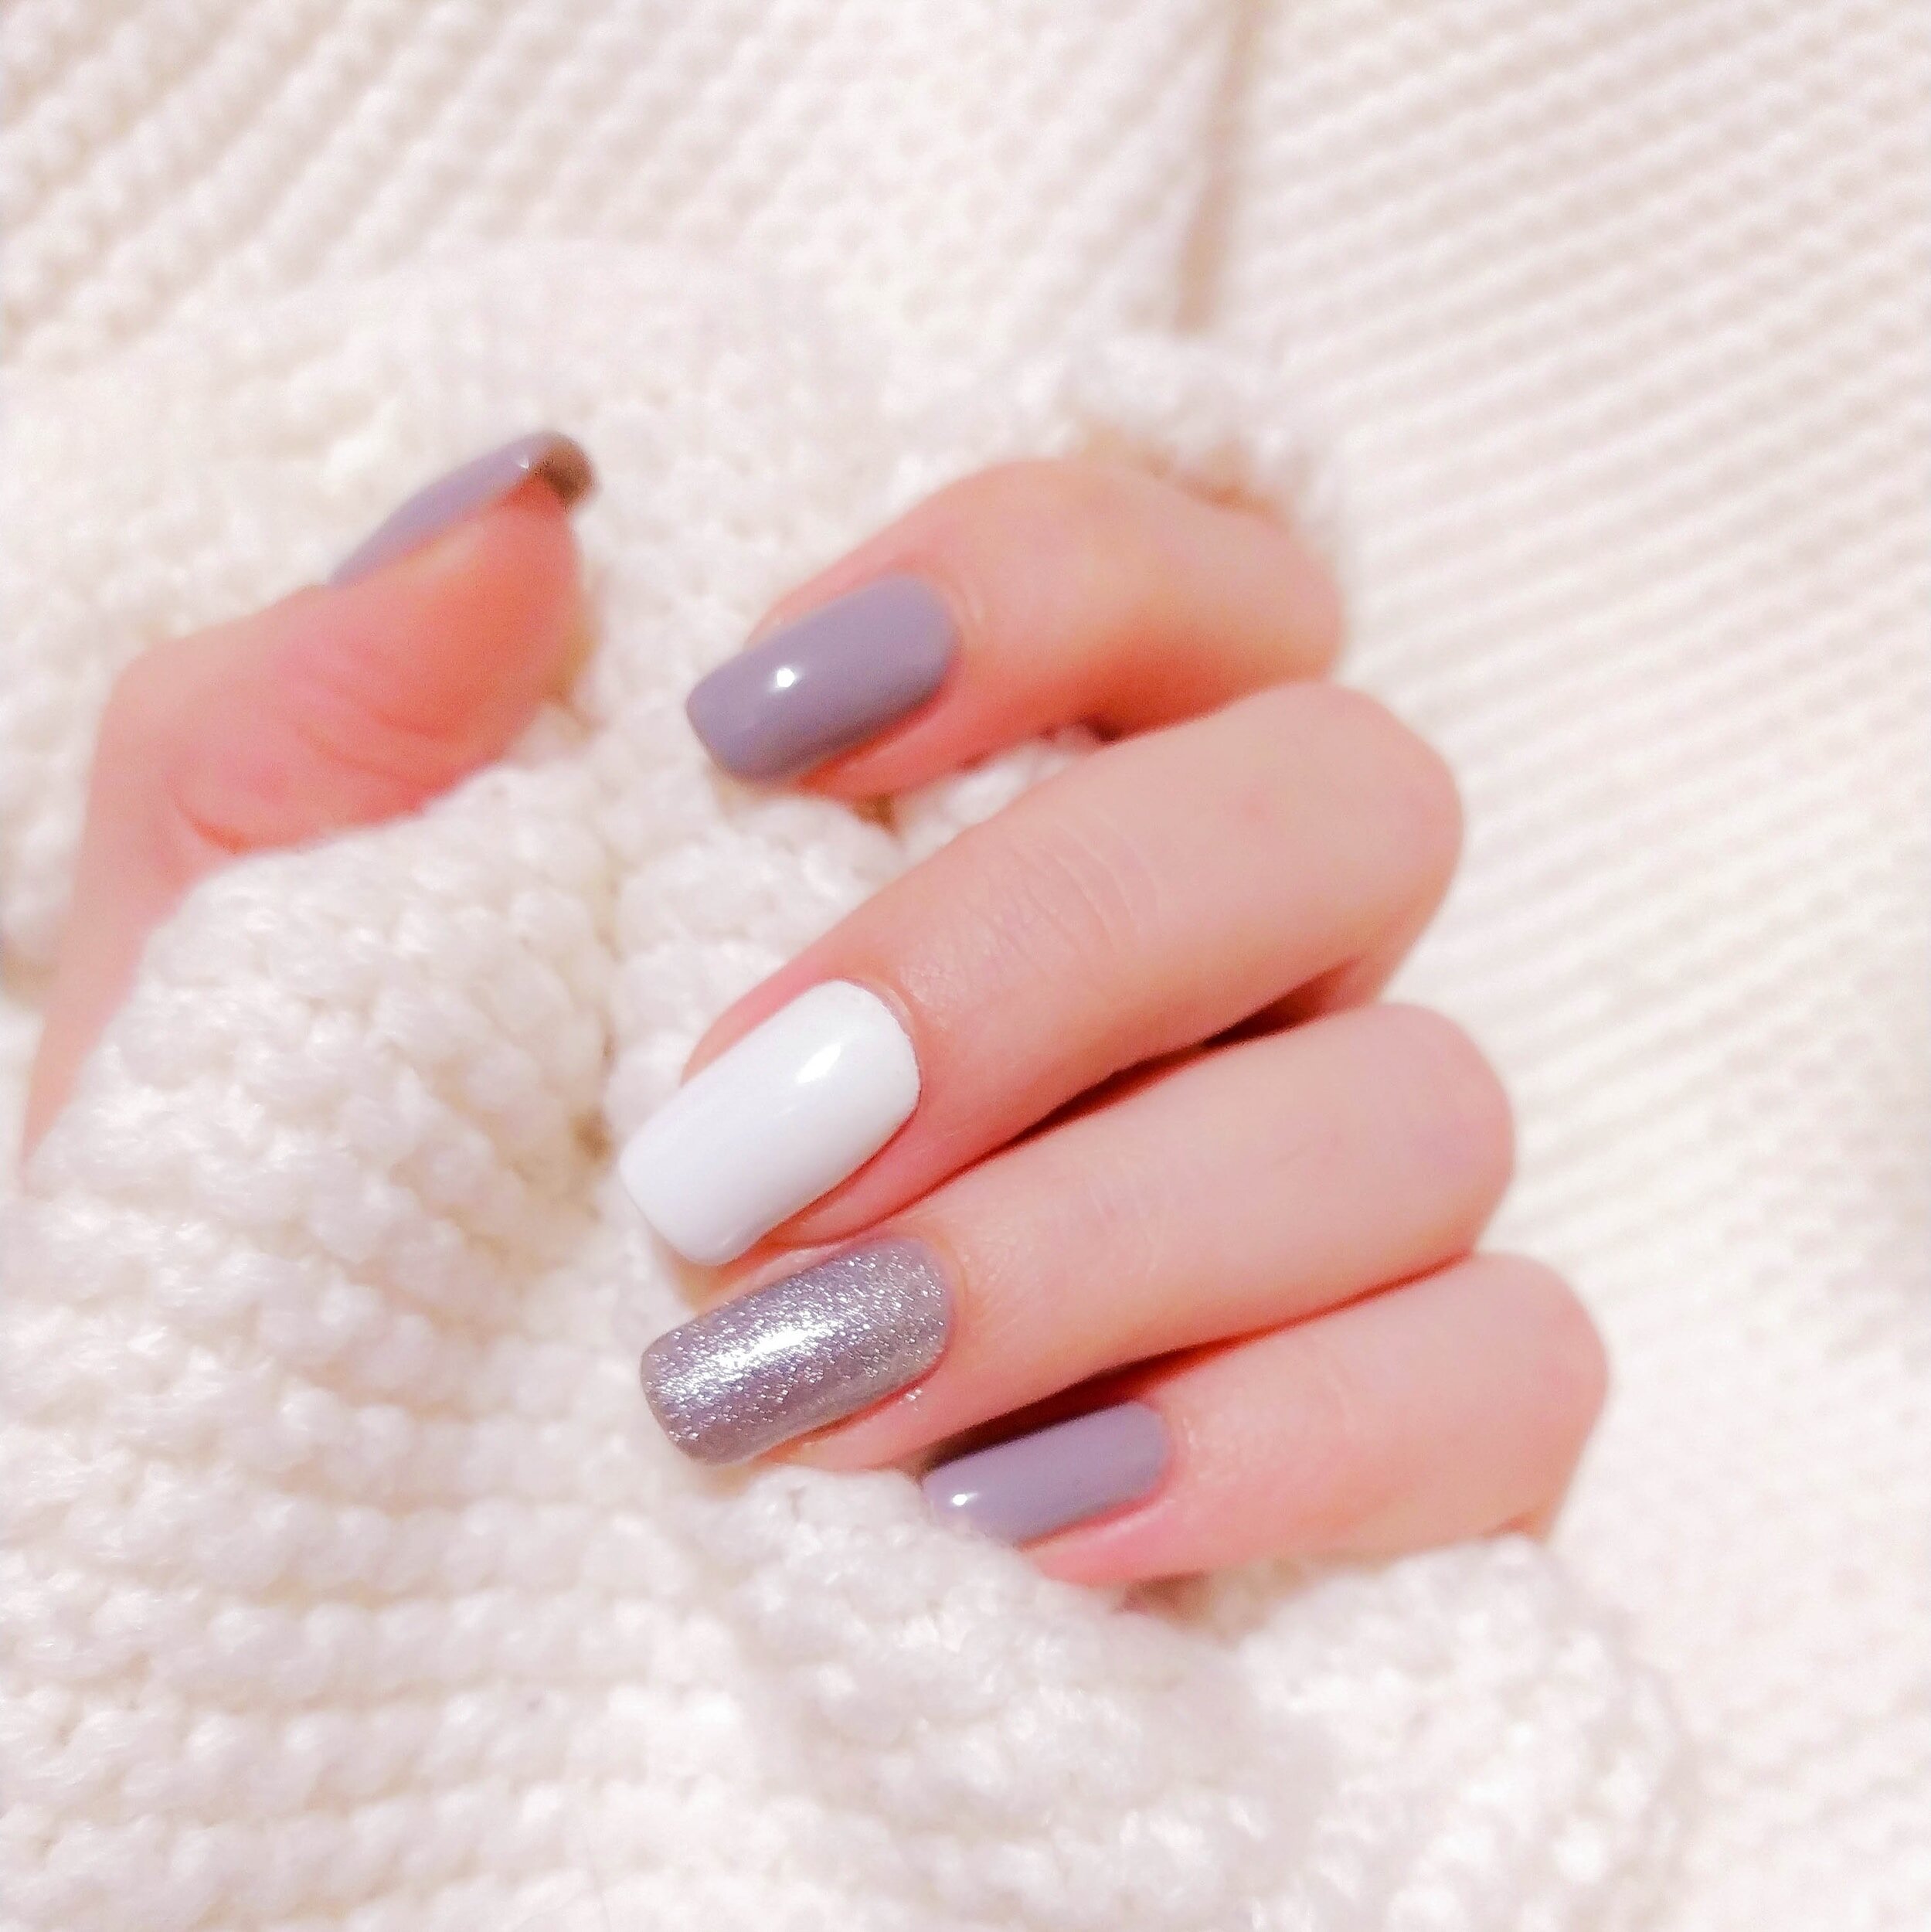 The 5 best nail salons in Long Beach